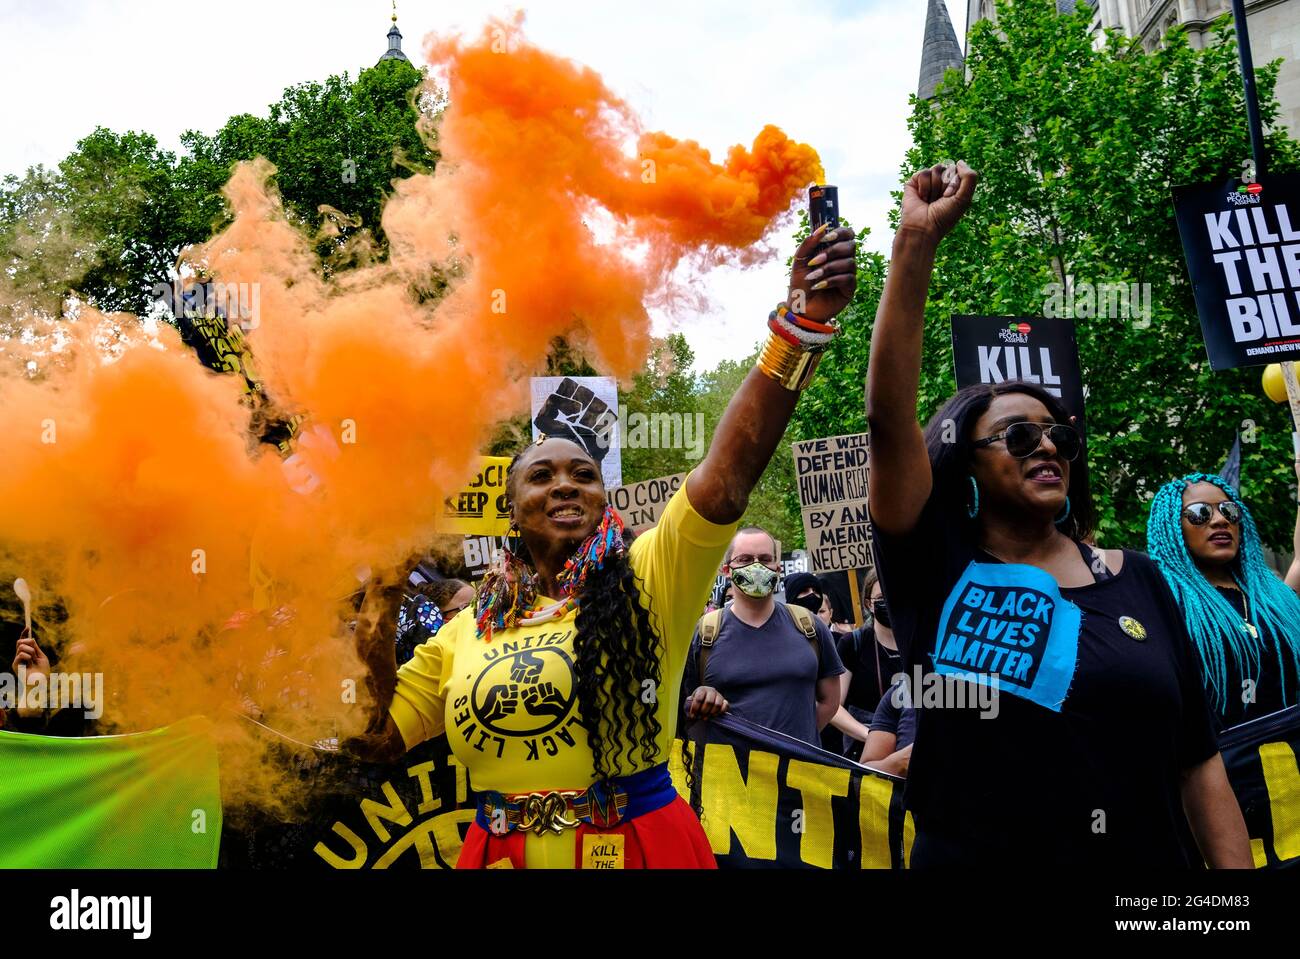 Marvina Newton and Delia Mattis at a Black lives Matter / Kill the Bill demonstration. fighting against the use of police power as a means of silencing black voices, in response to recent killings of black people by the police. May 2021 Stock Photo